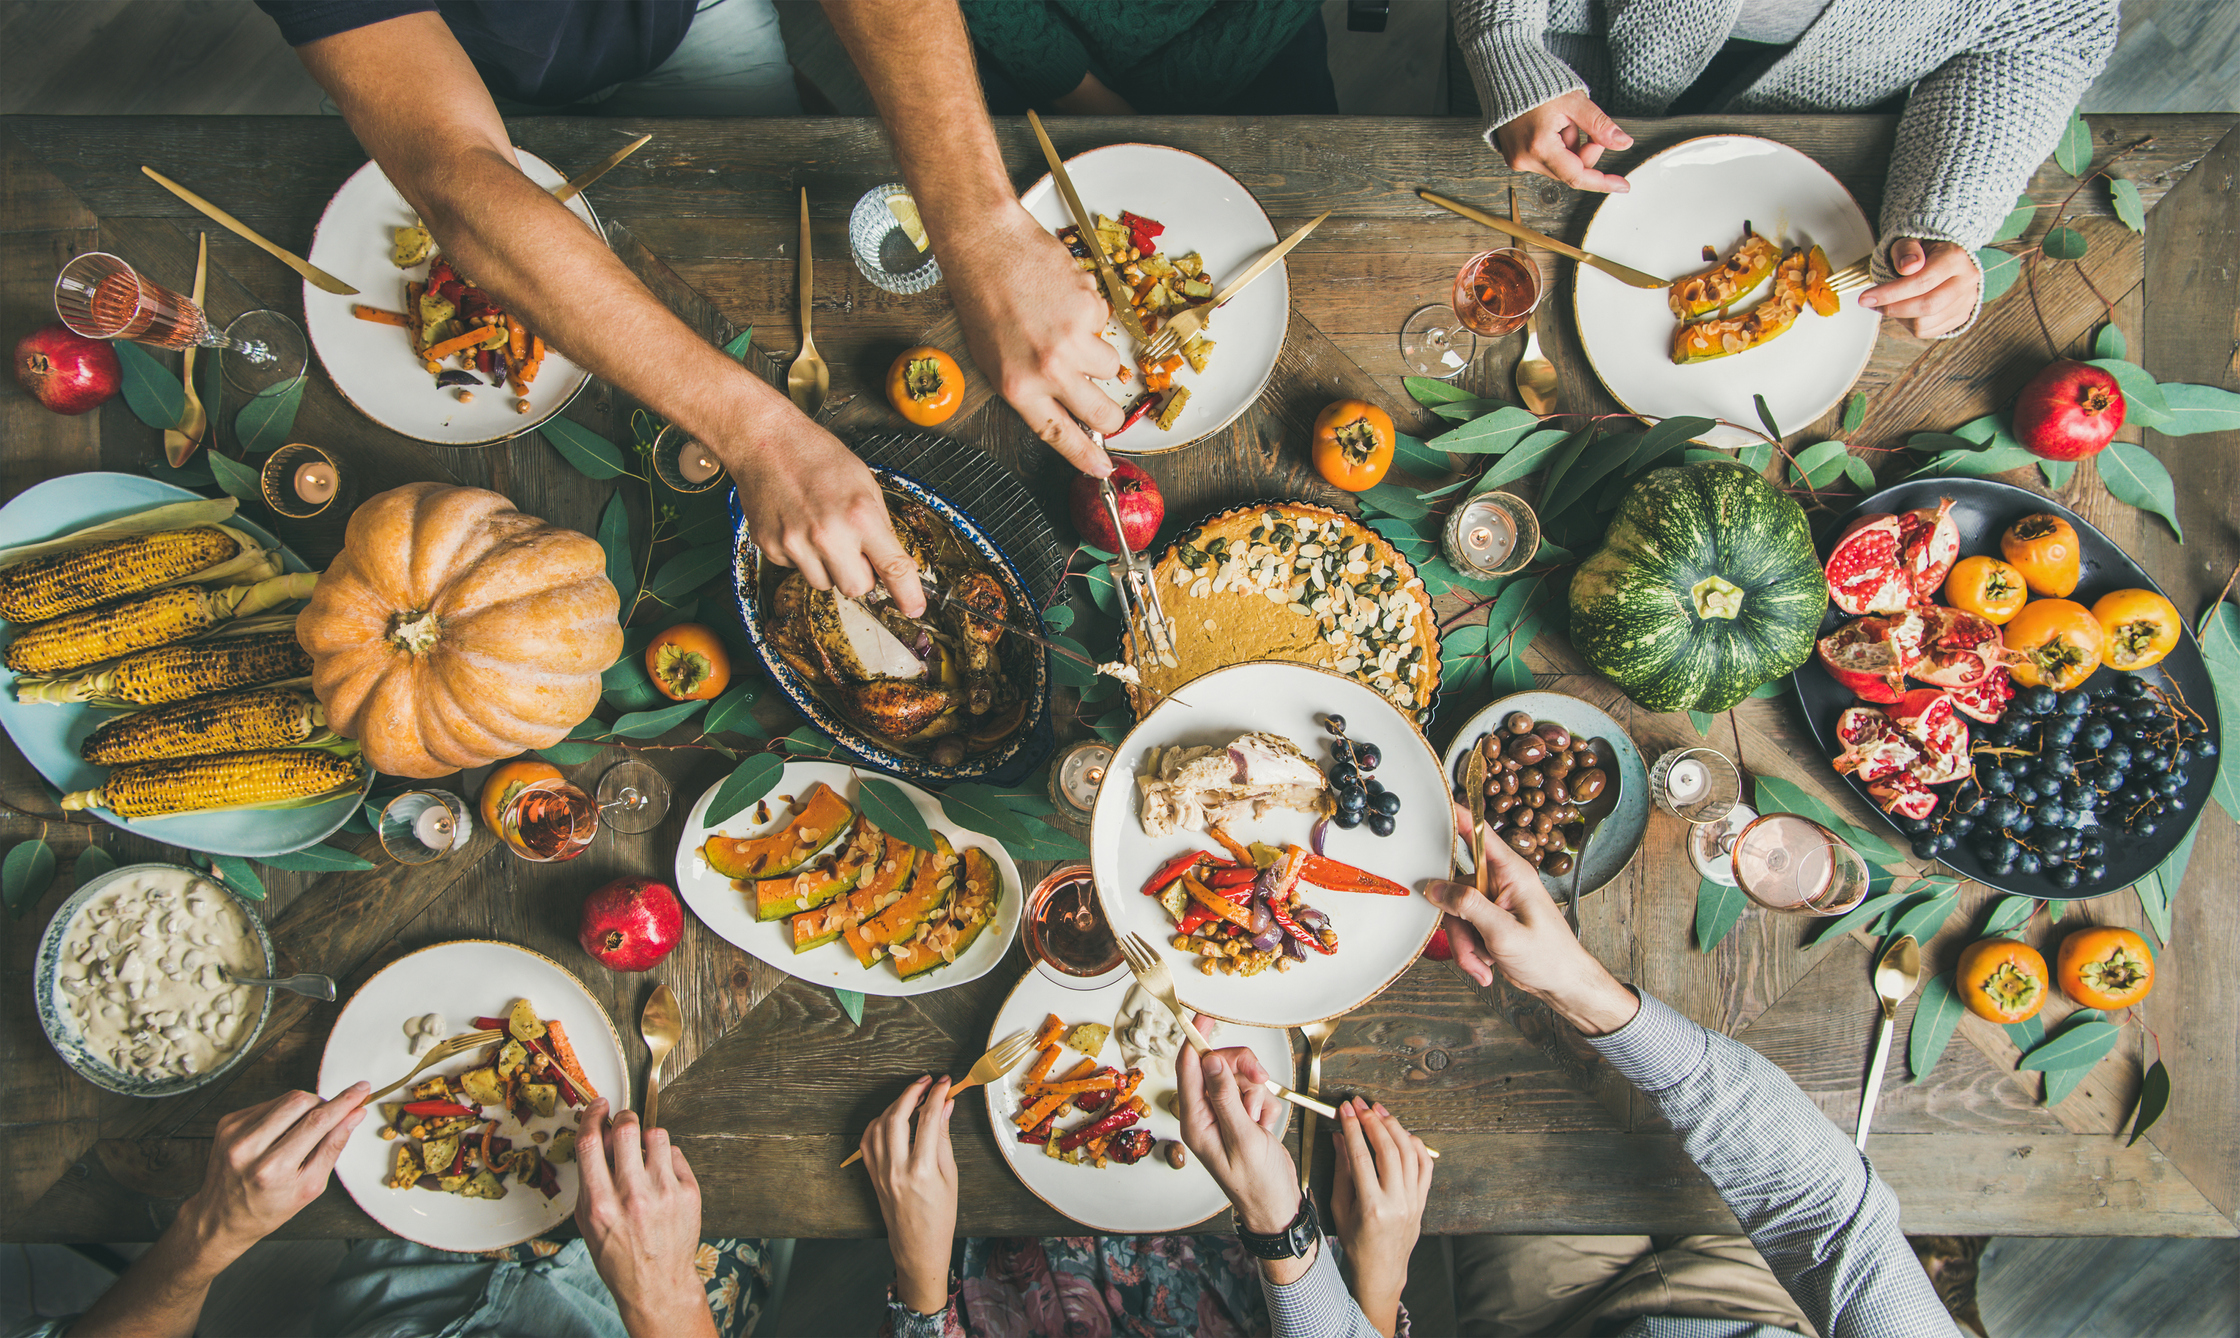 A group of people eating a vegan, plant-based Thanksgiving meal.